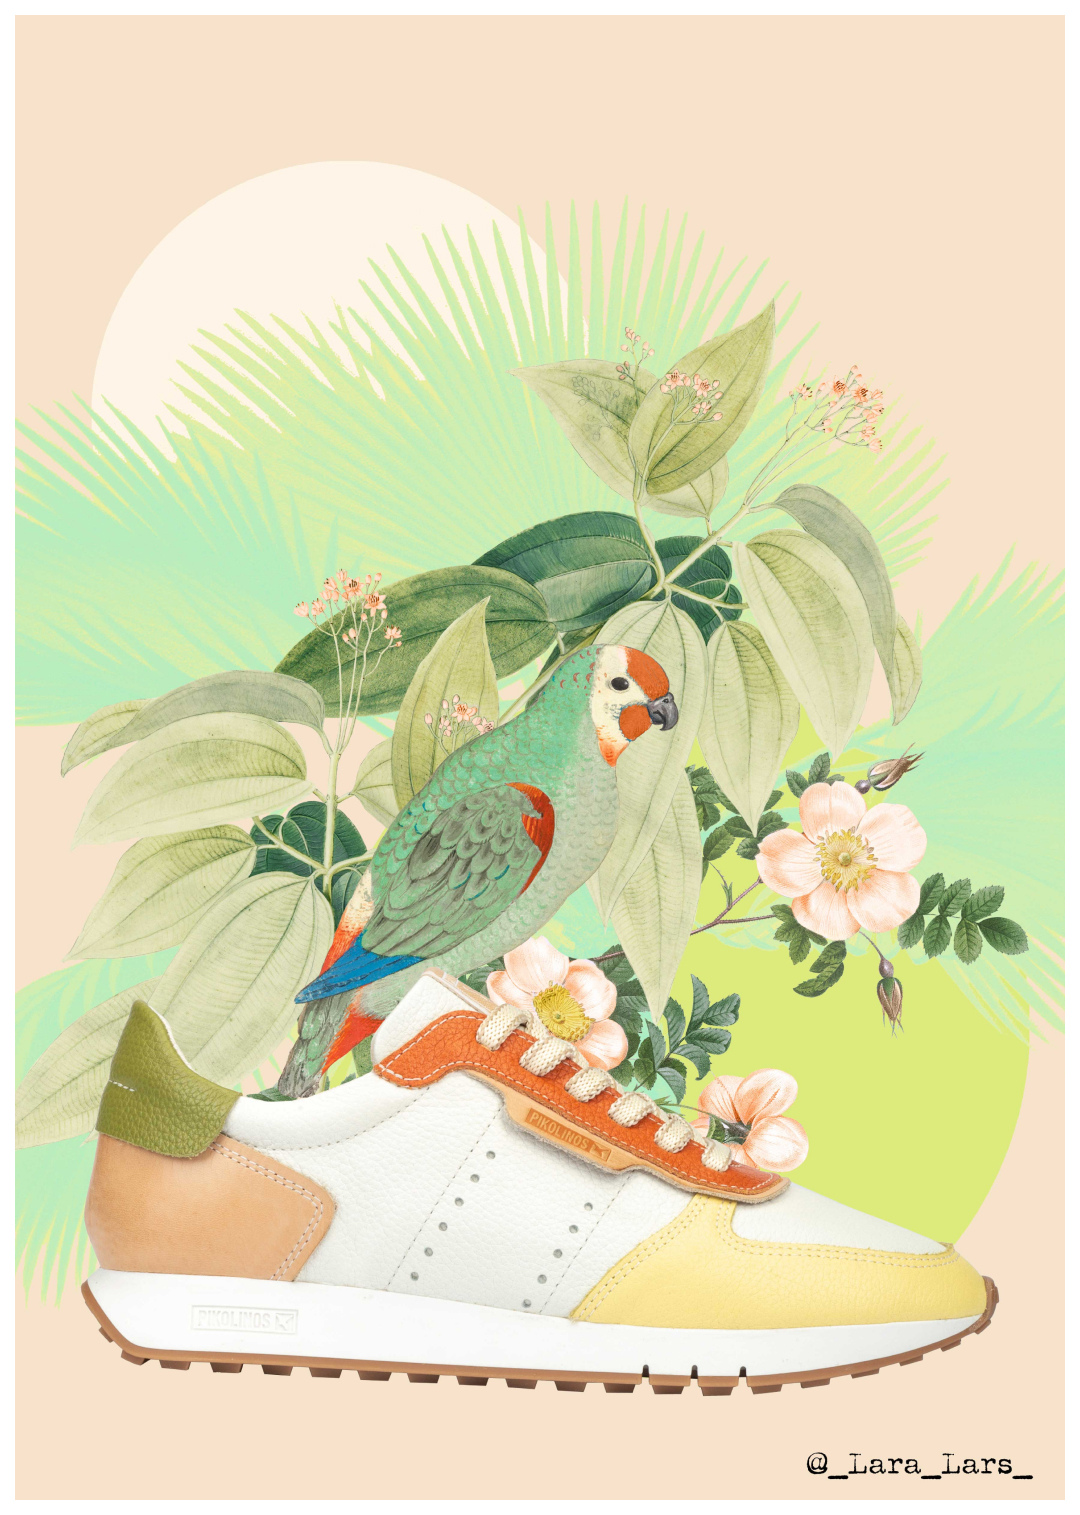 Women's creamy sneakers on a drawing created by Lara Lars with leaves, flowers and a bird